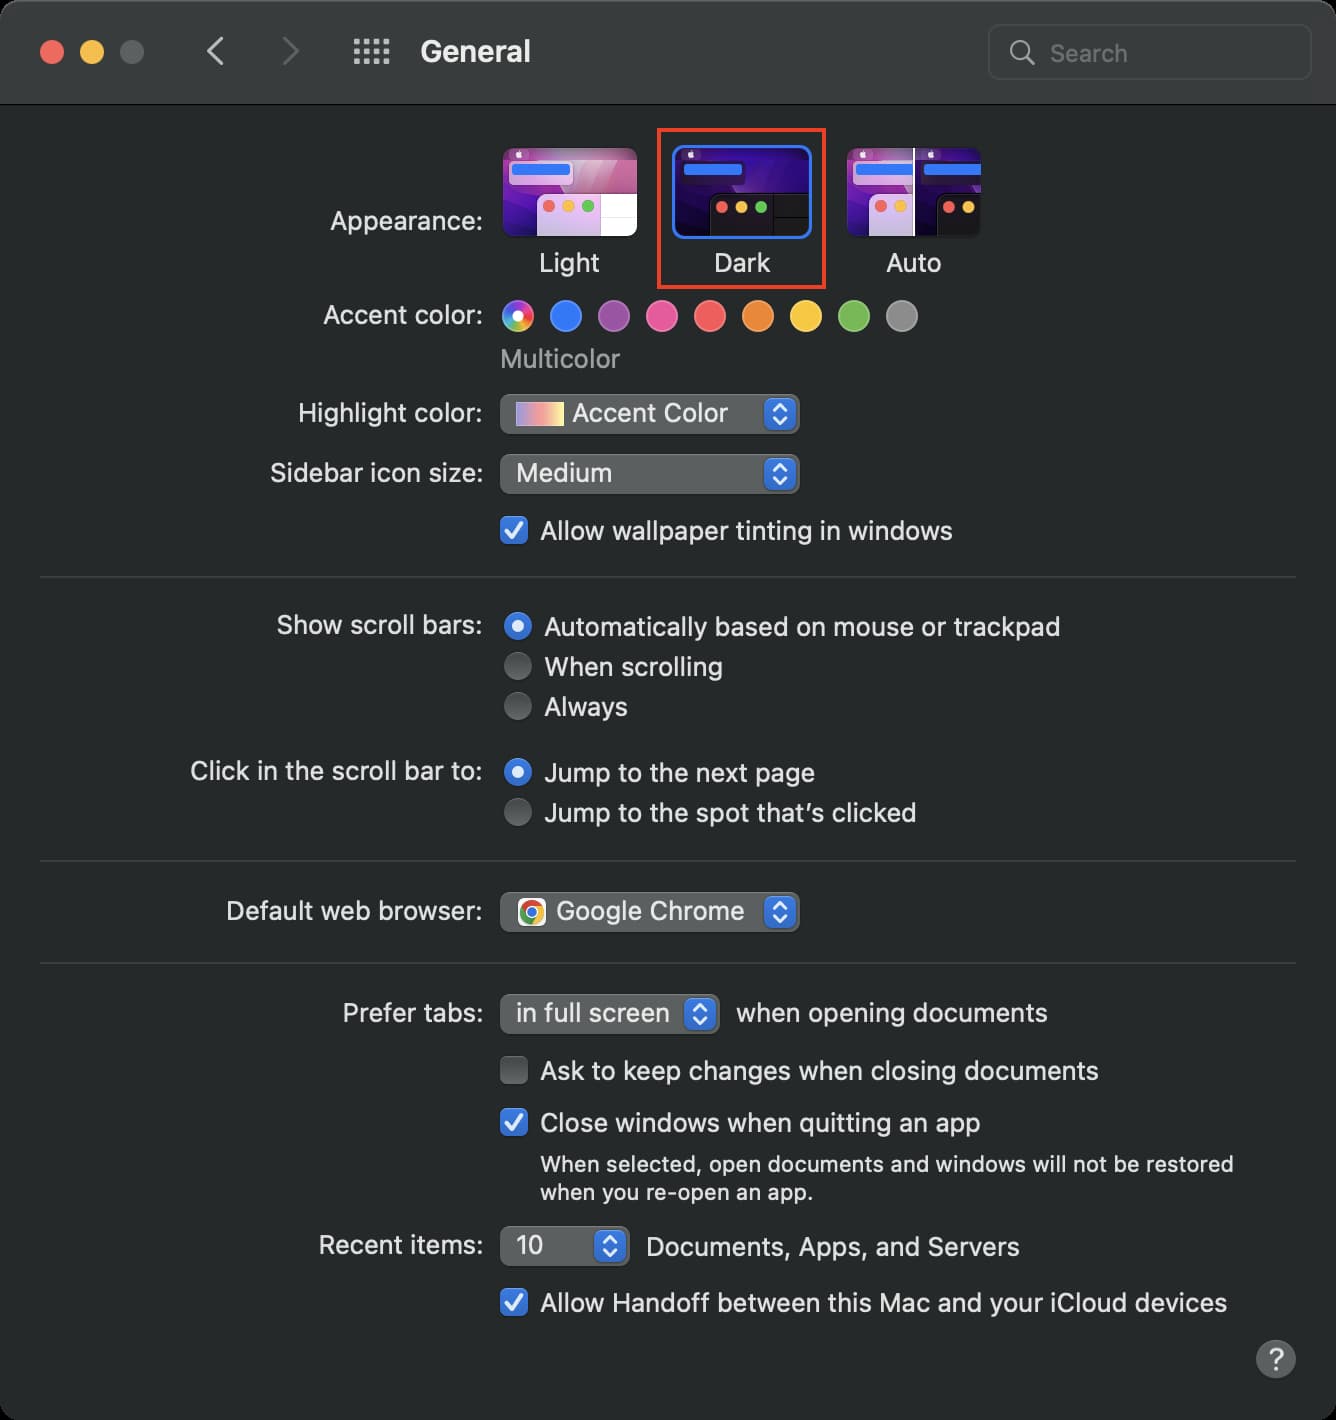 Enable Dark Mode on Mac from System Preferences